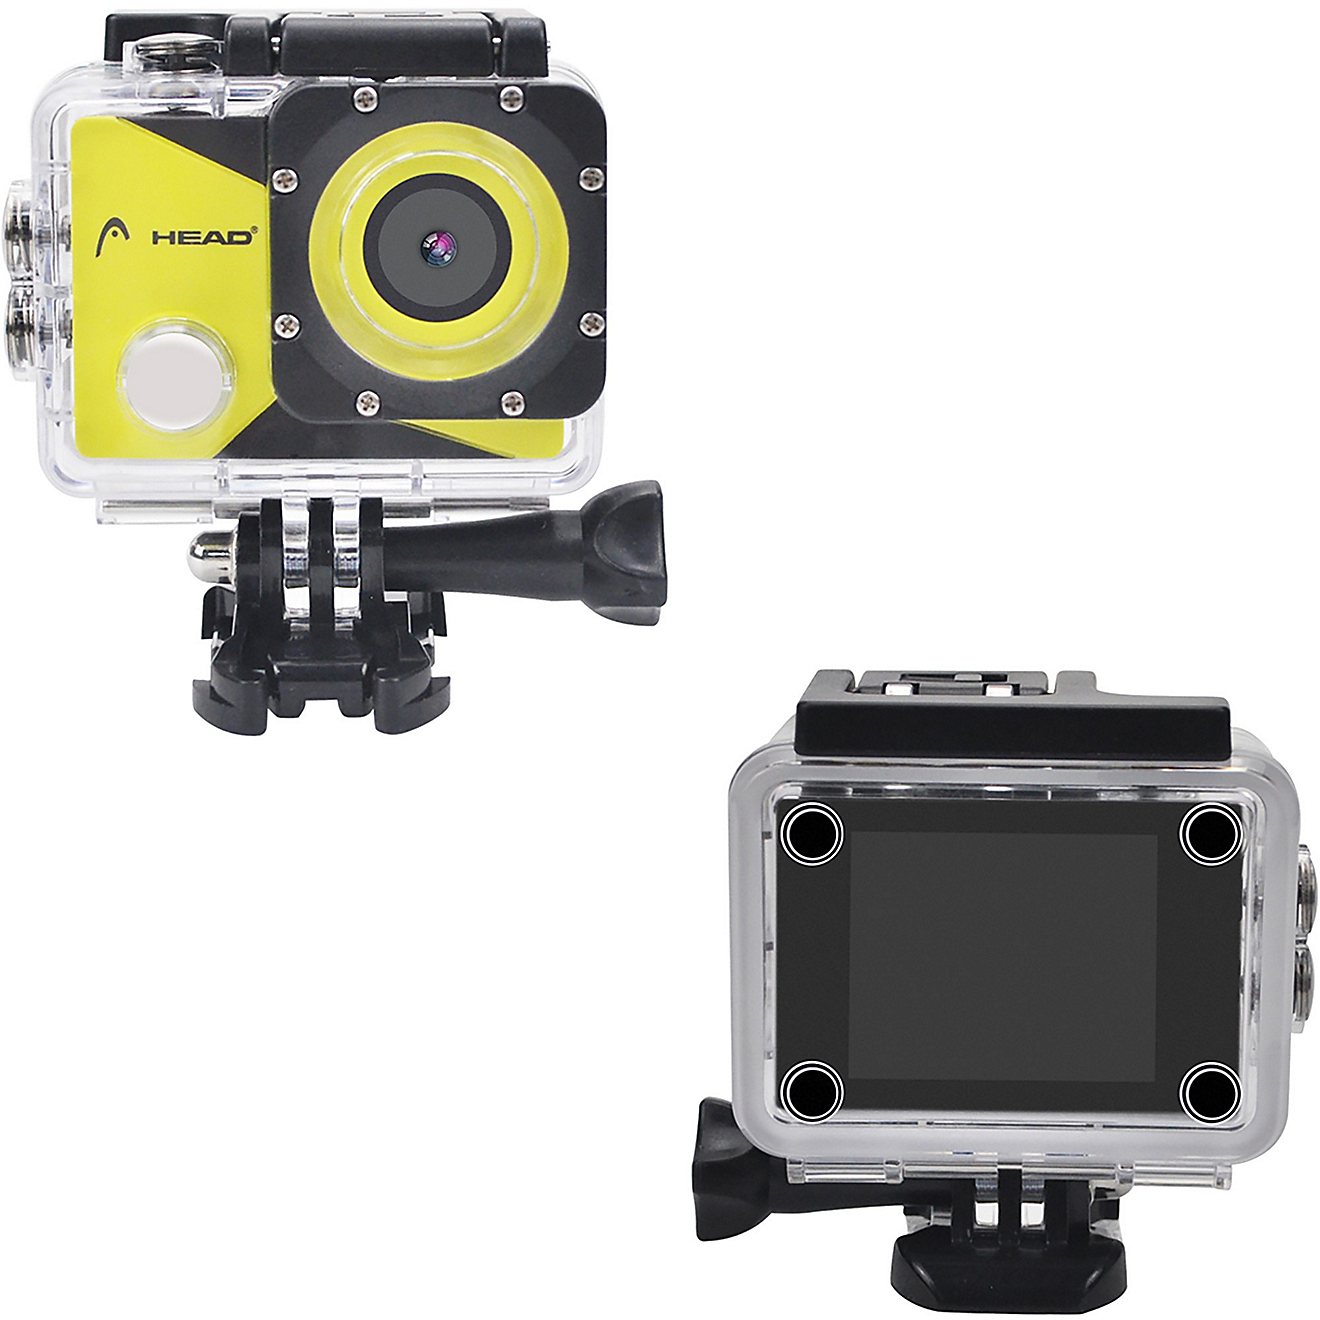 HEAD 4K Action Camera                                                                                                            - view number 3